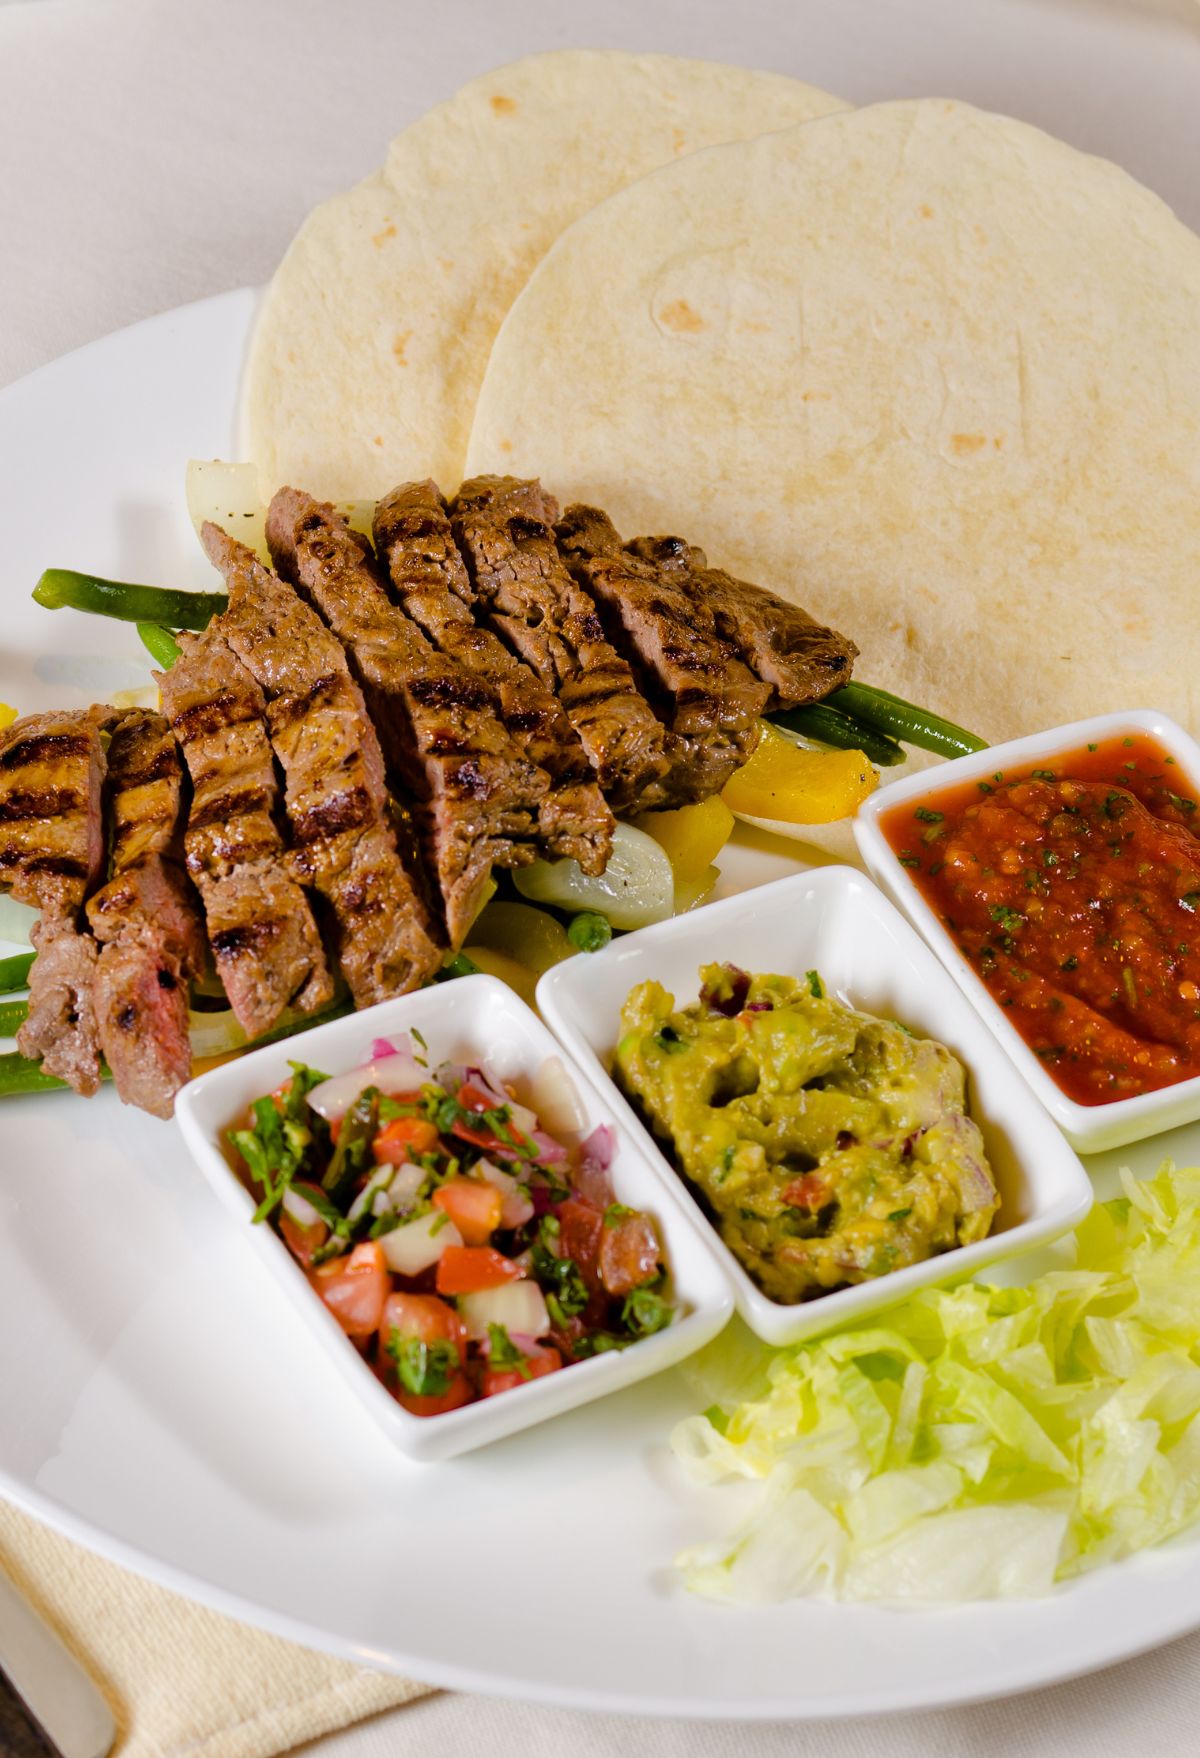 Grilled steak fajitas with tortillas, guacamole, salsa, and vegetables on a white plate.